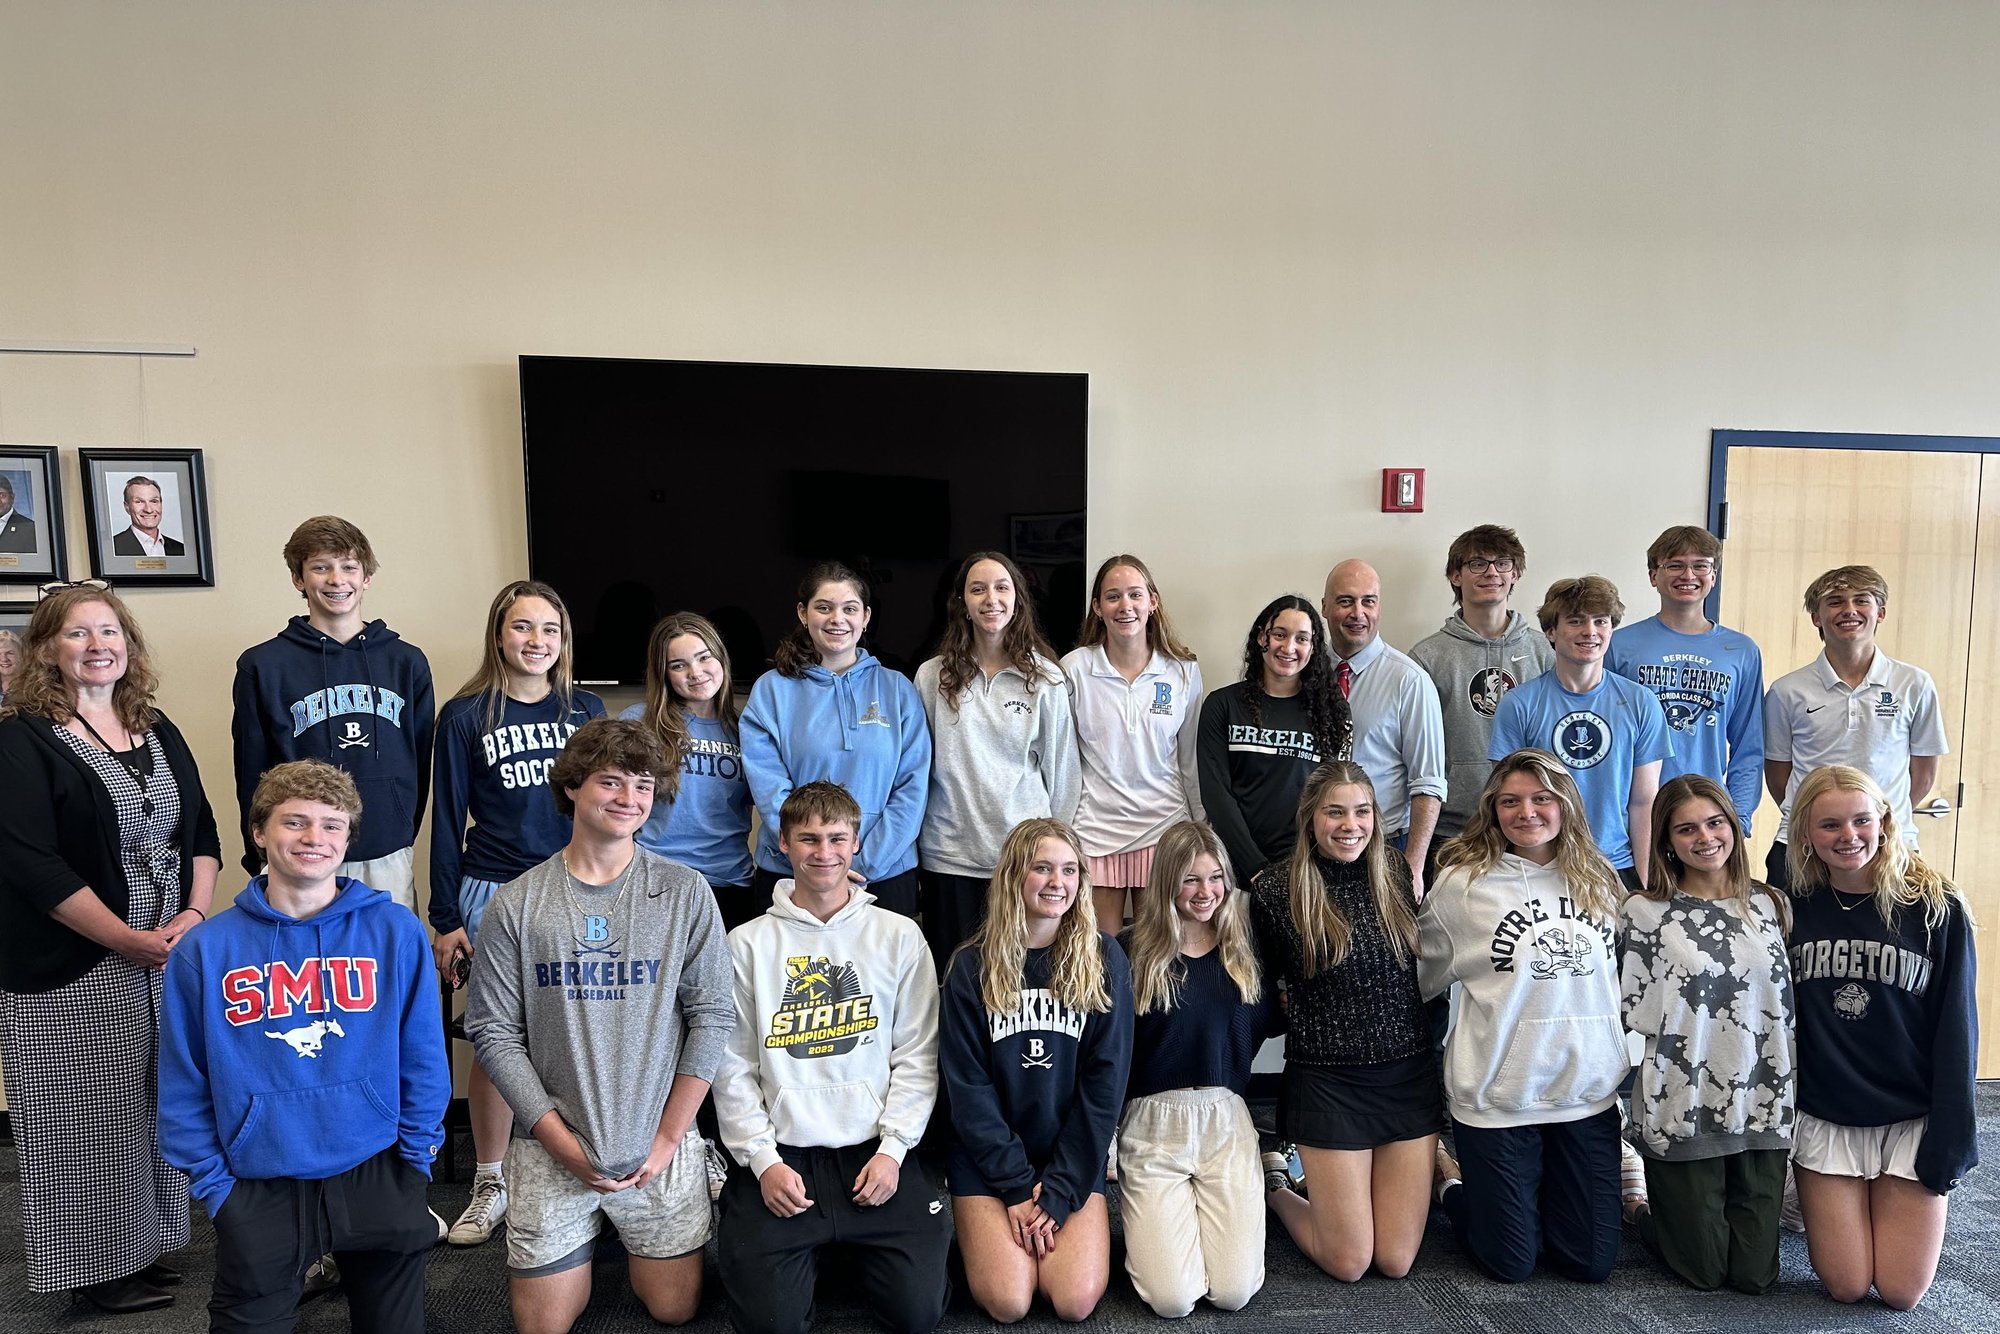 Former St. Mary's Students wearing their college sweatshirts.